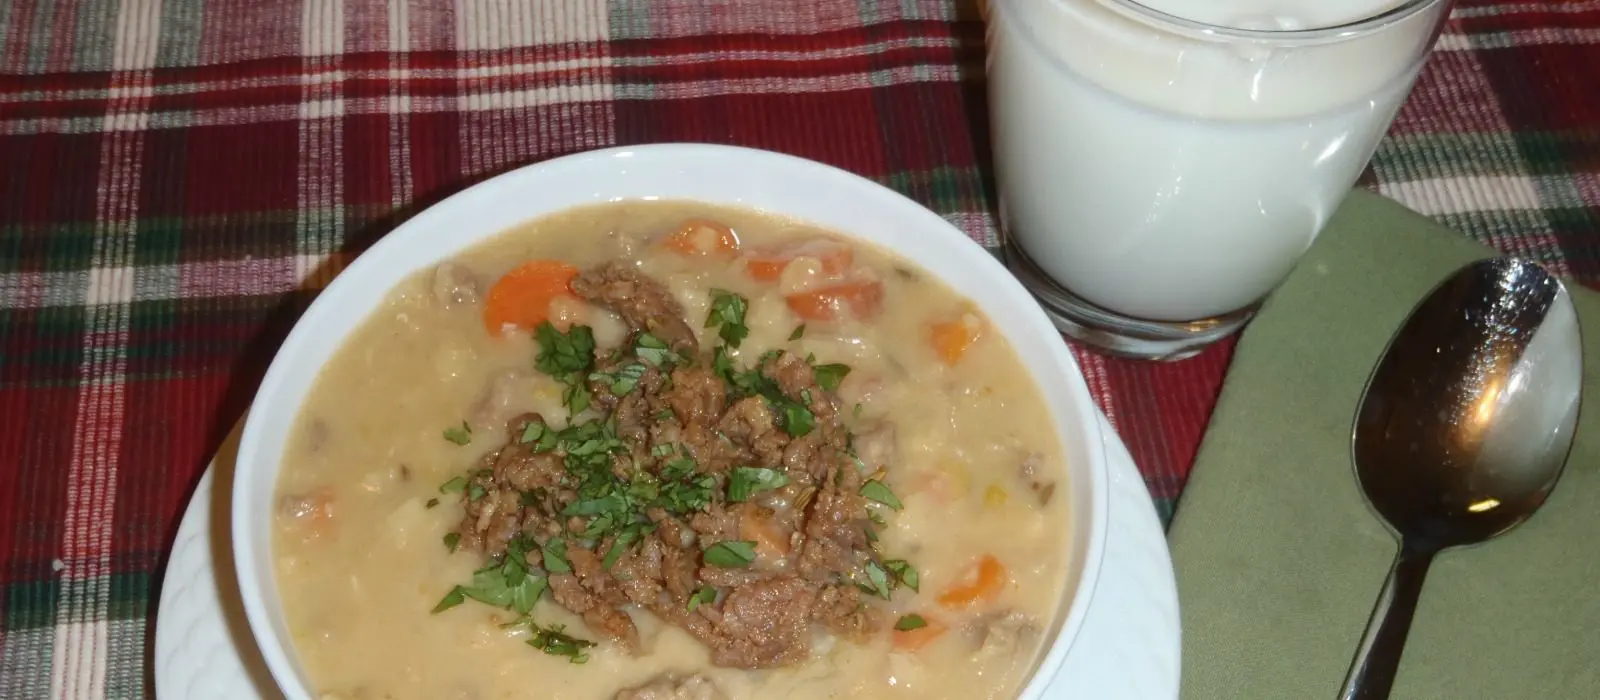 Creamy Lentil Soup with Spicy Italian Sausage and Toasted Fennel Seeds